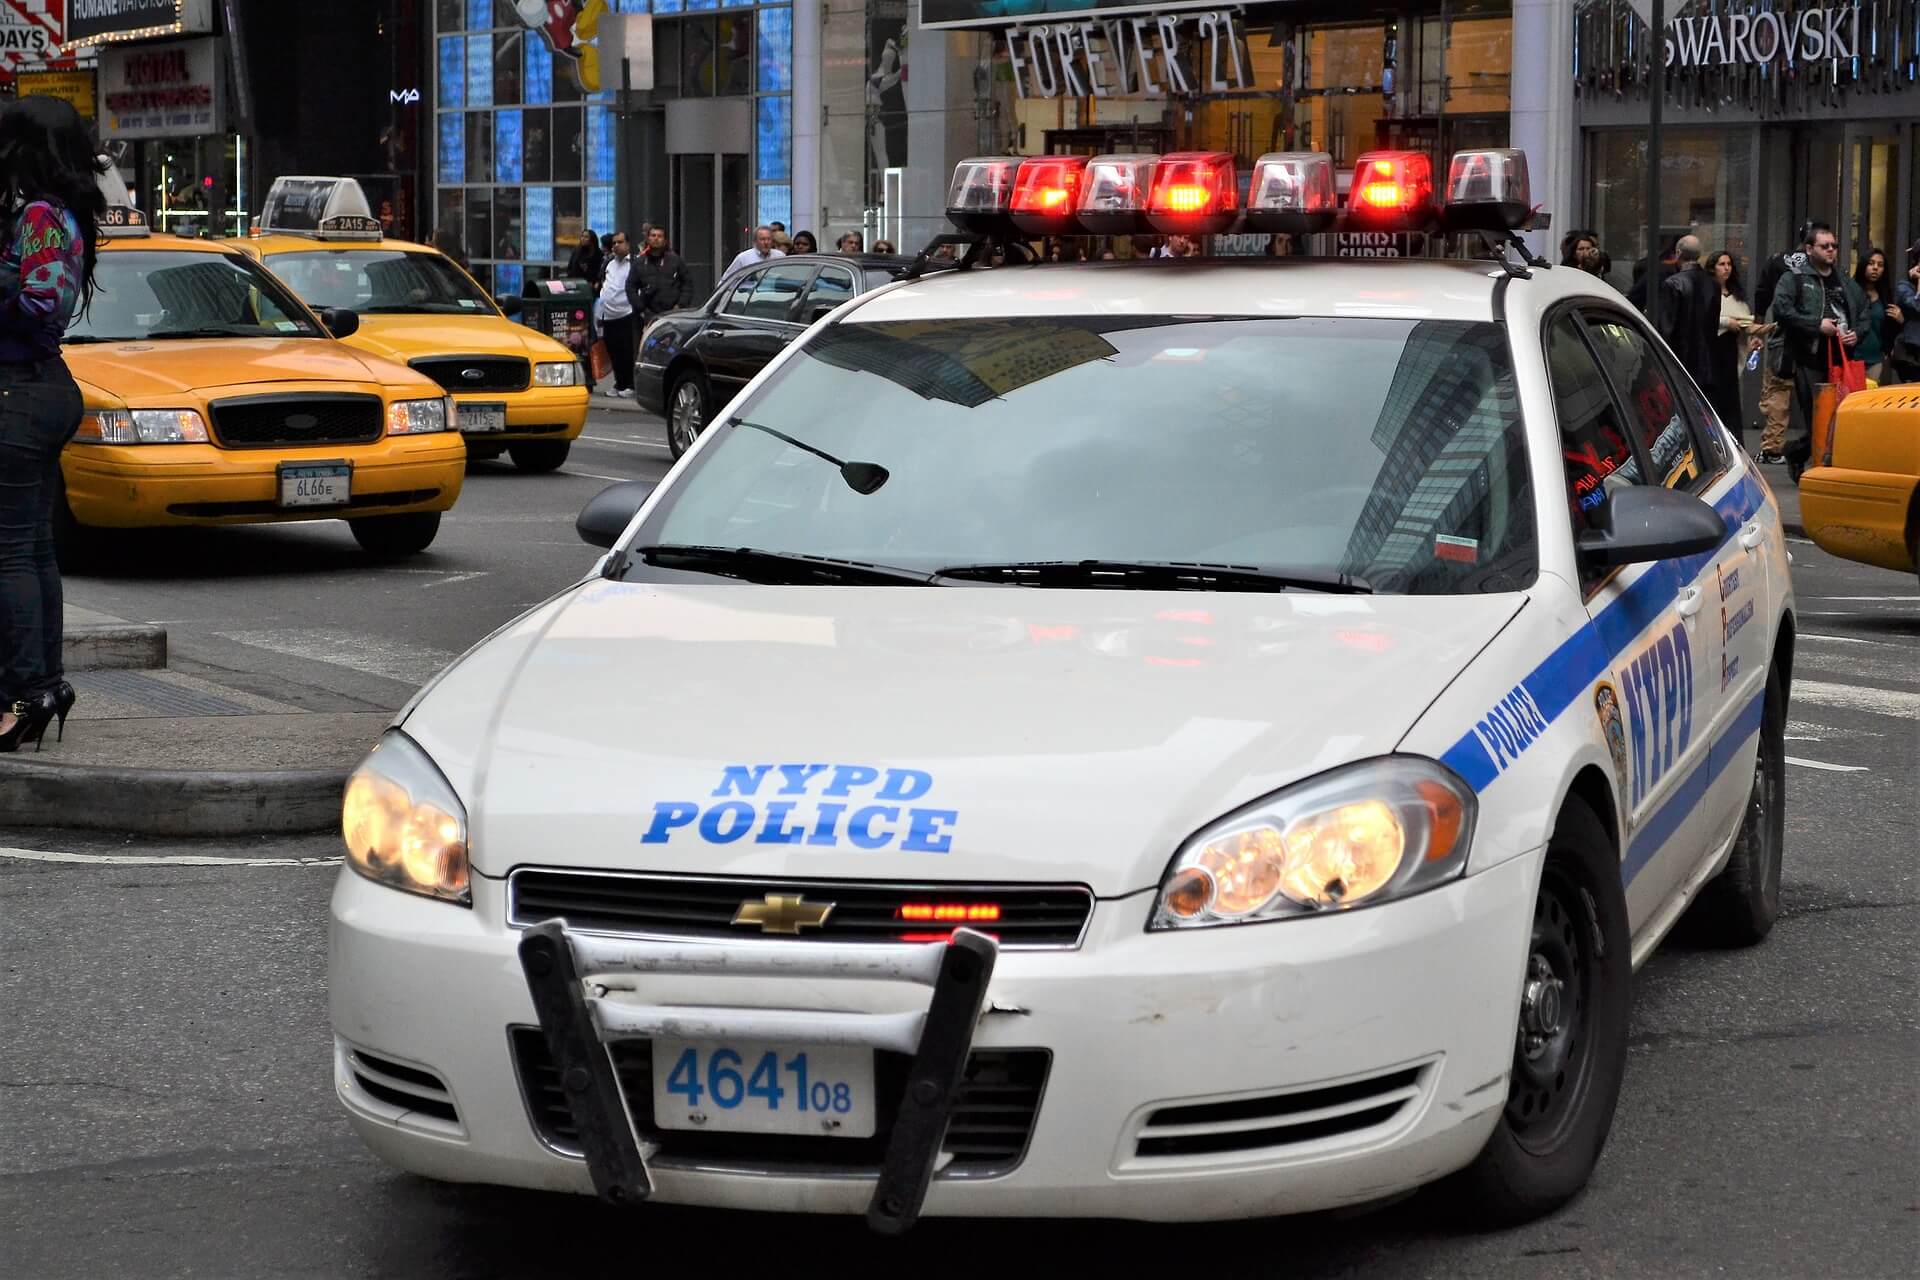 nypd police car with sirens